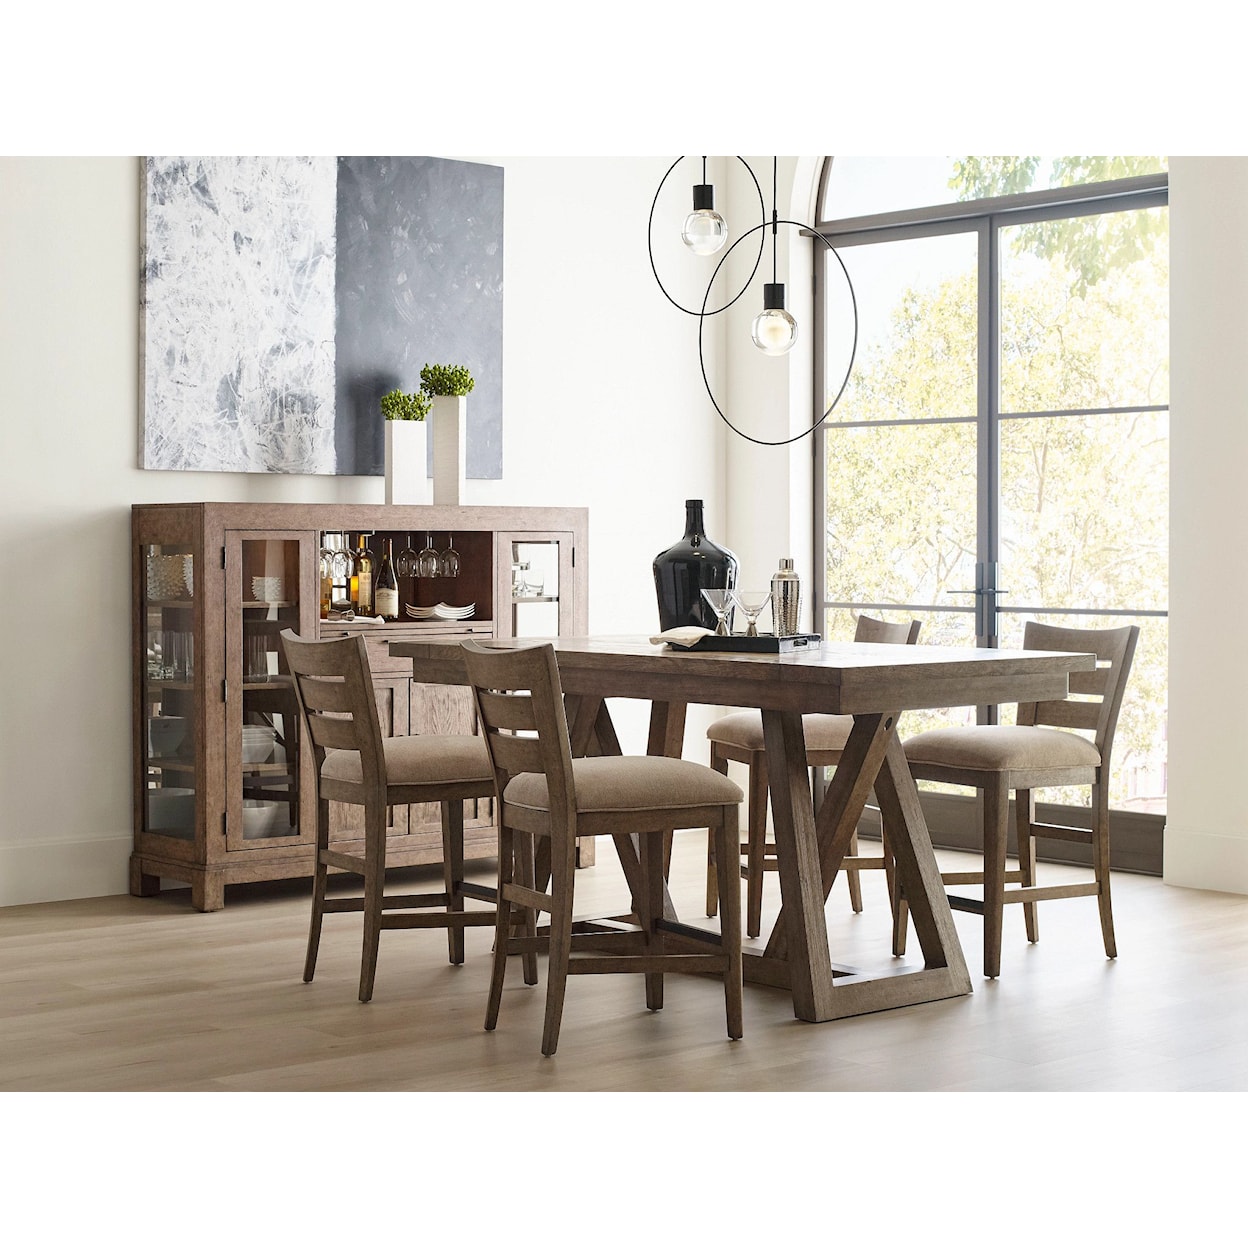 American Drew Skyline Clover Counter Height Dining Table